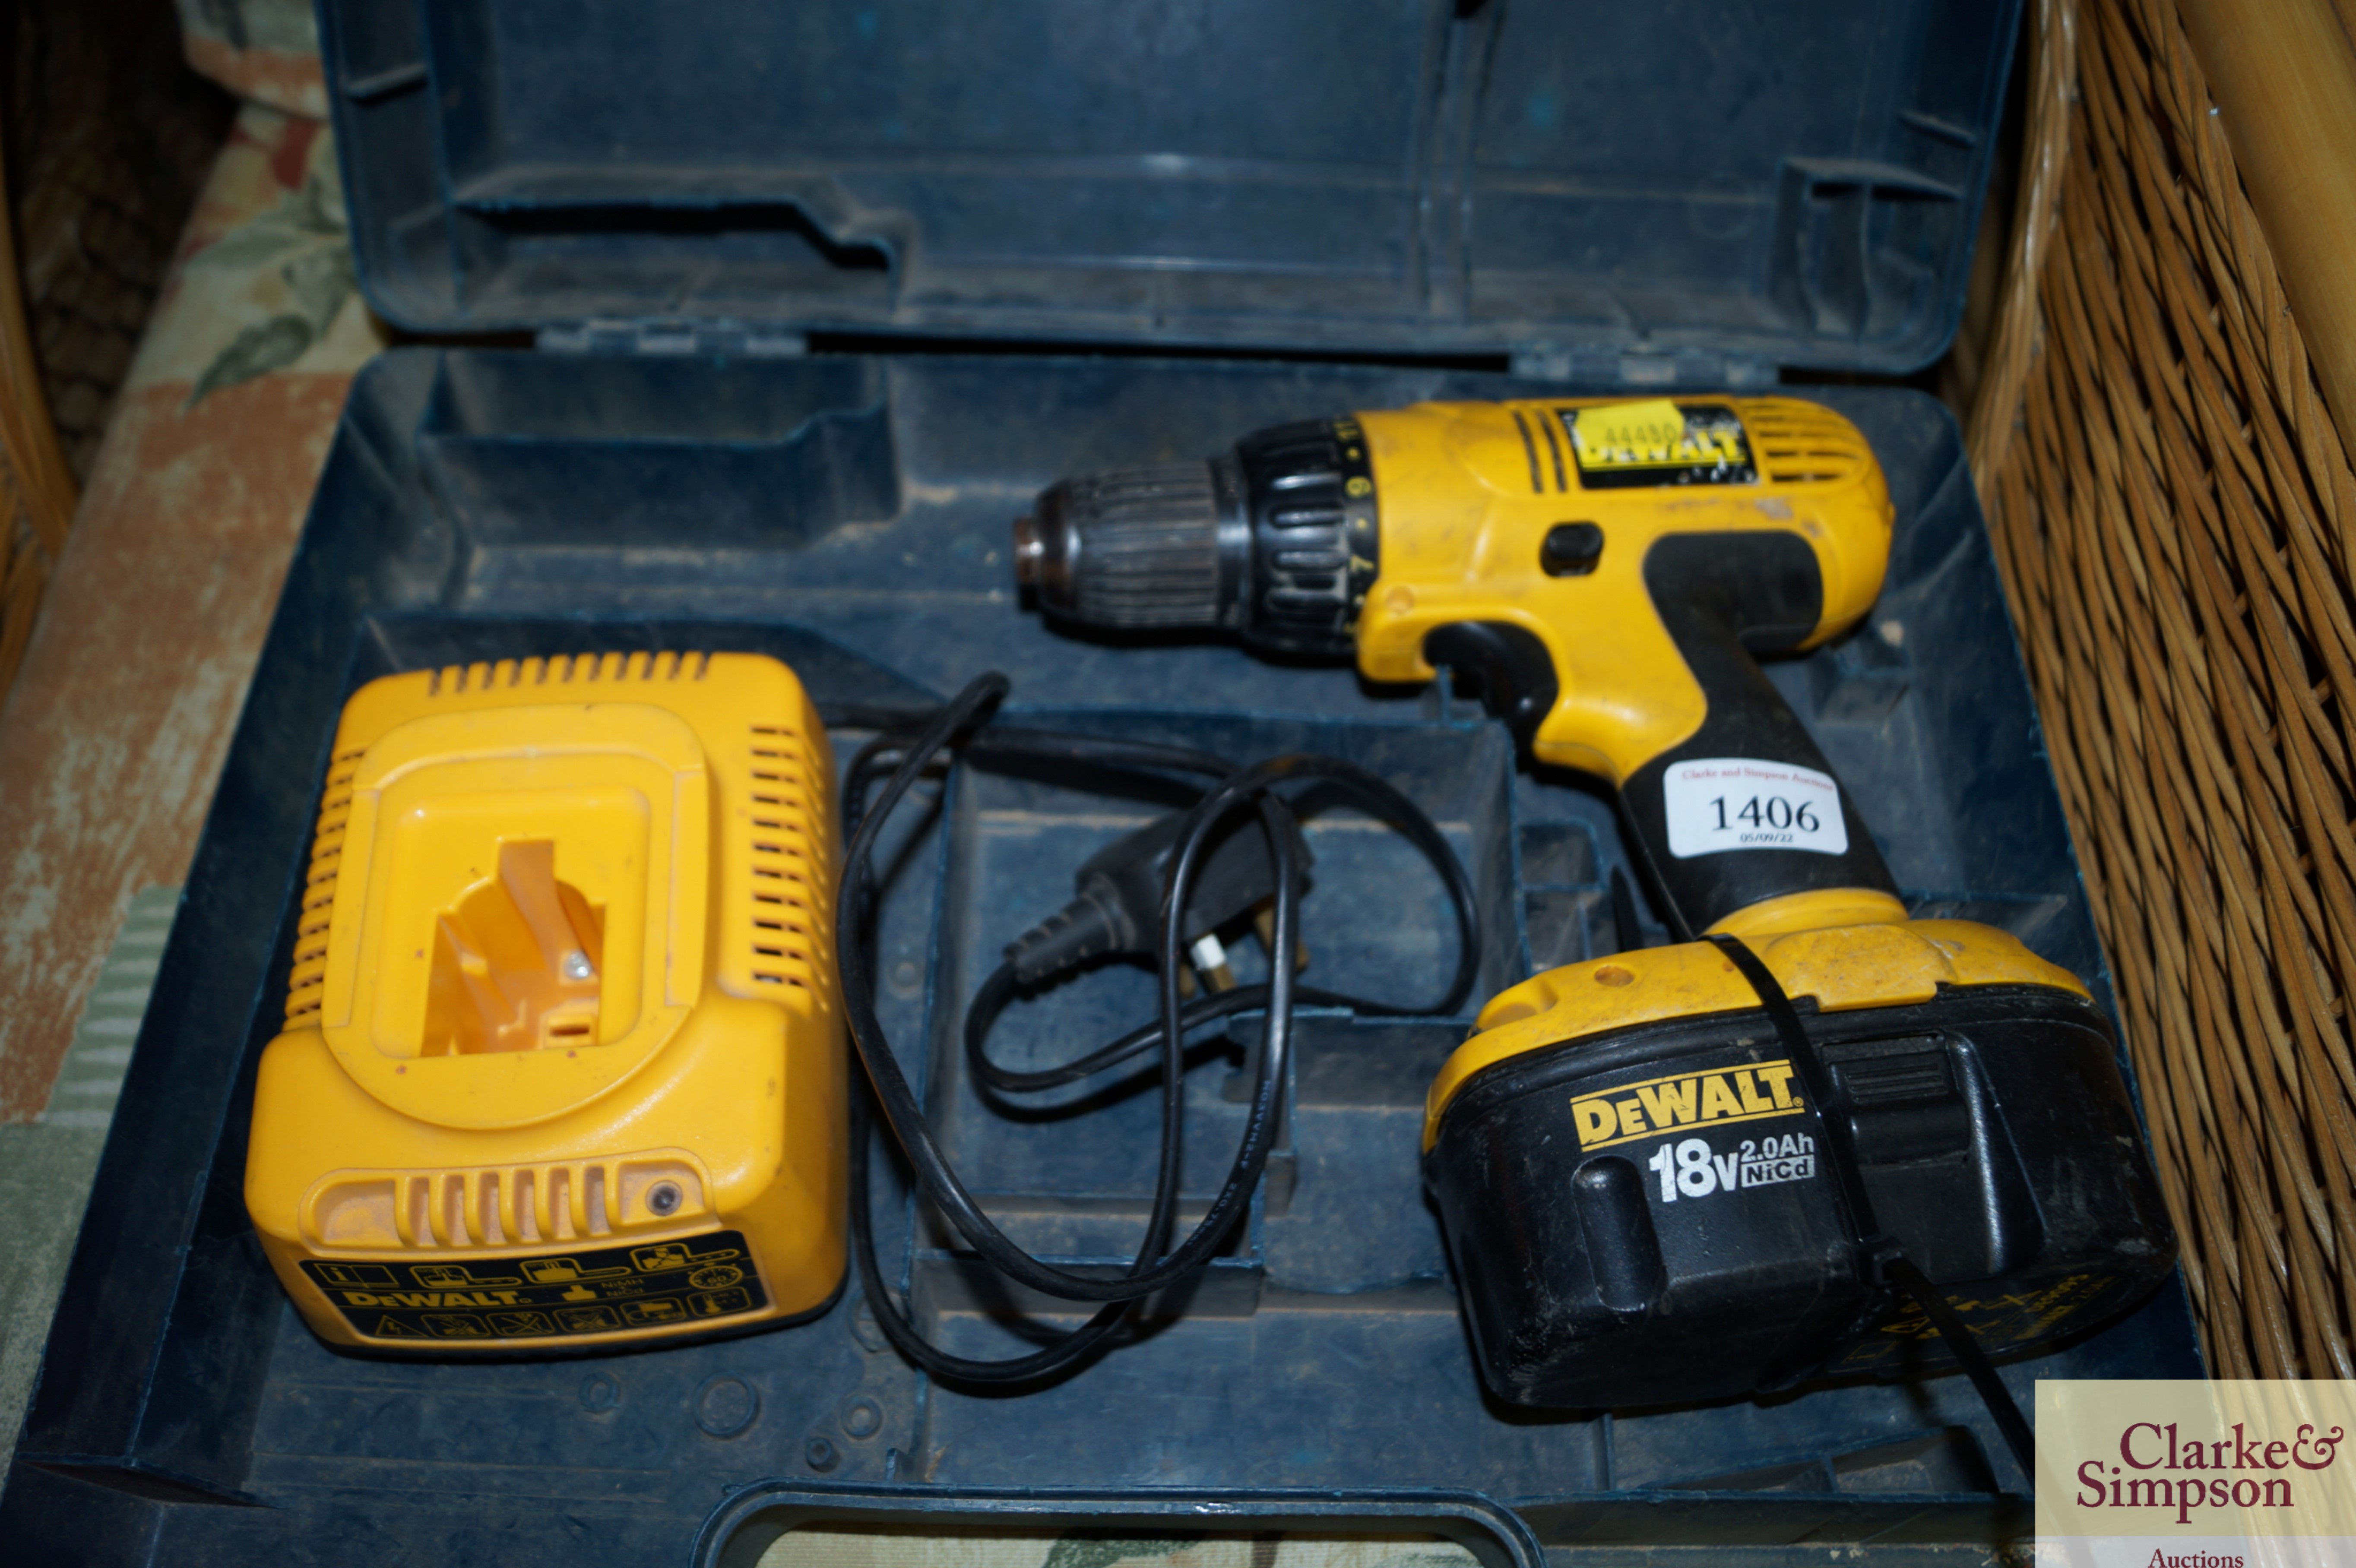 A Dewalt cordless drill with charger